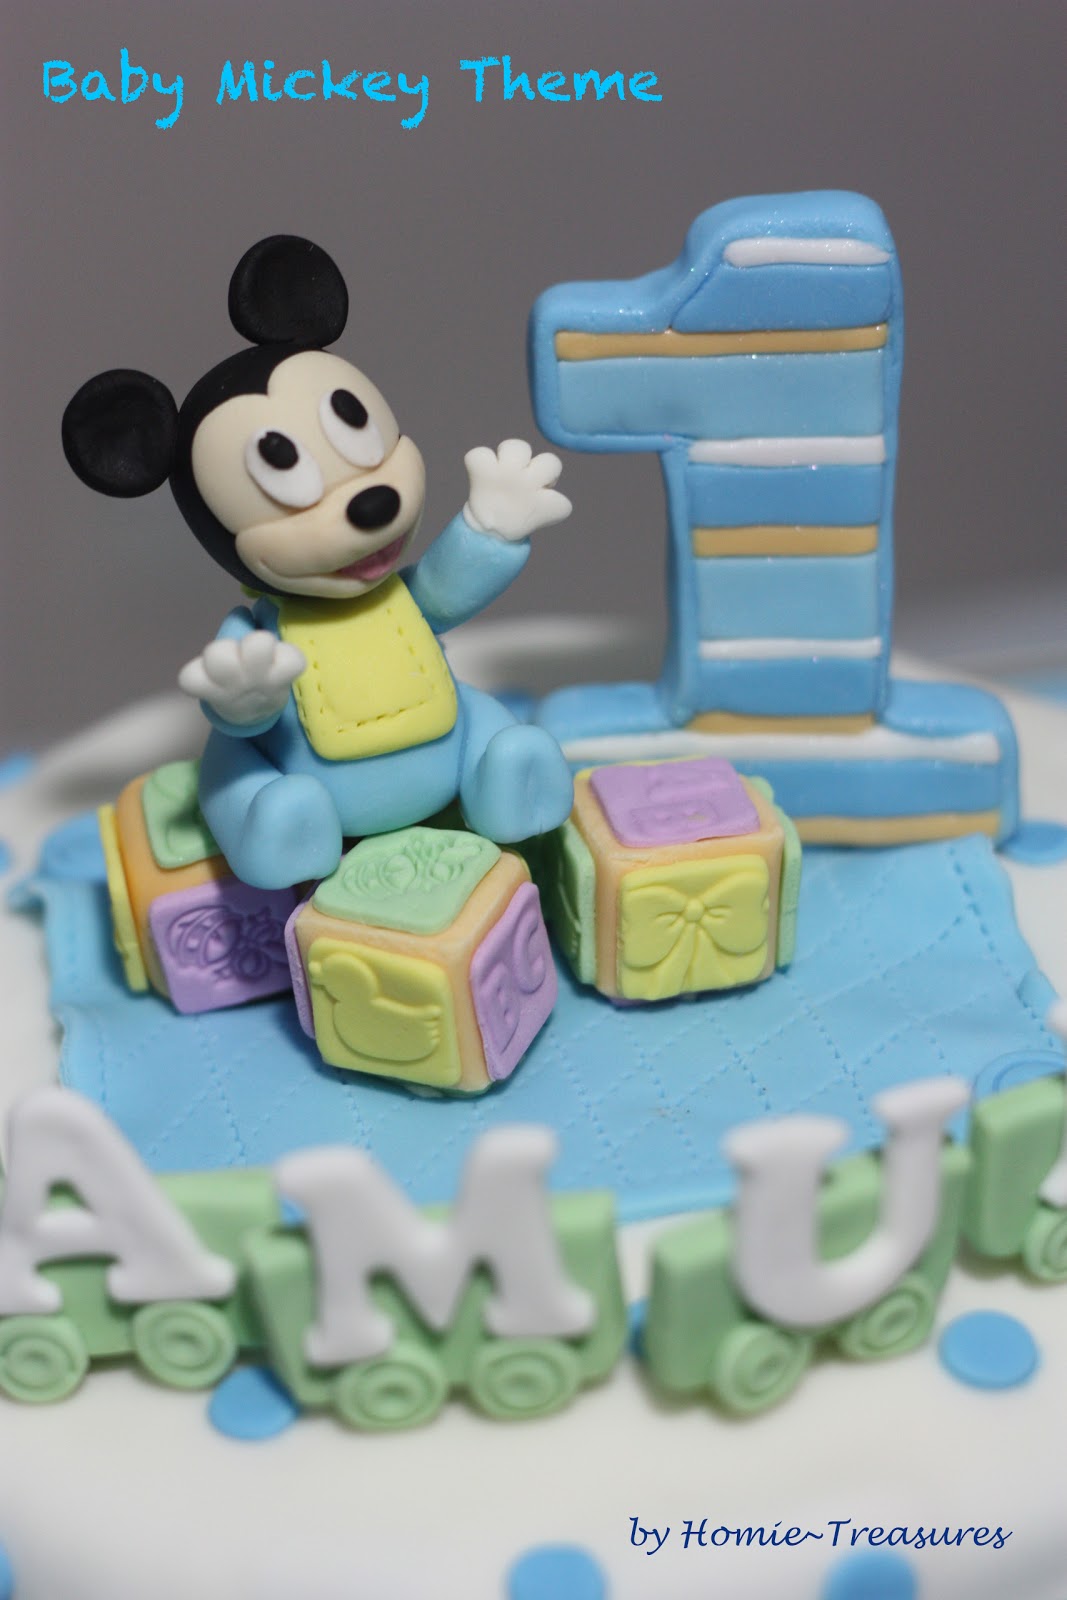 My humble piece of Art: 1st Birthday Cakes for A Pair of Adorable 